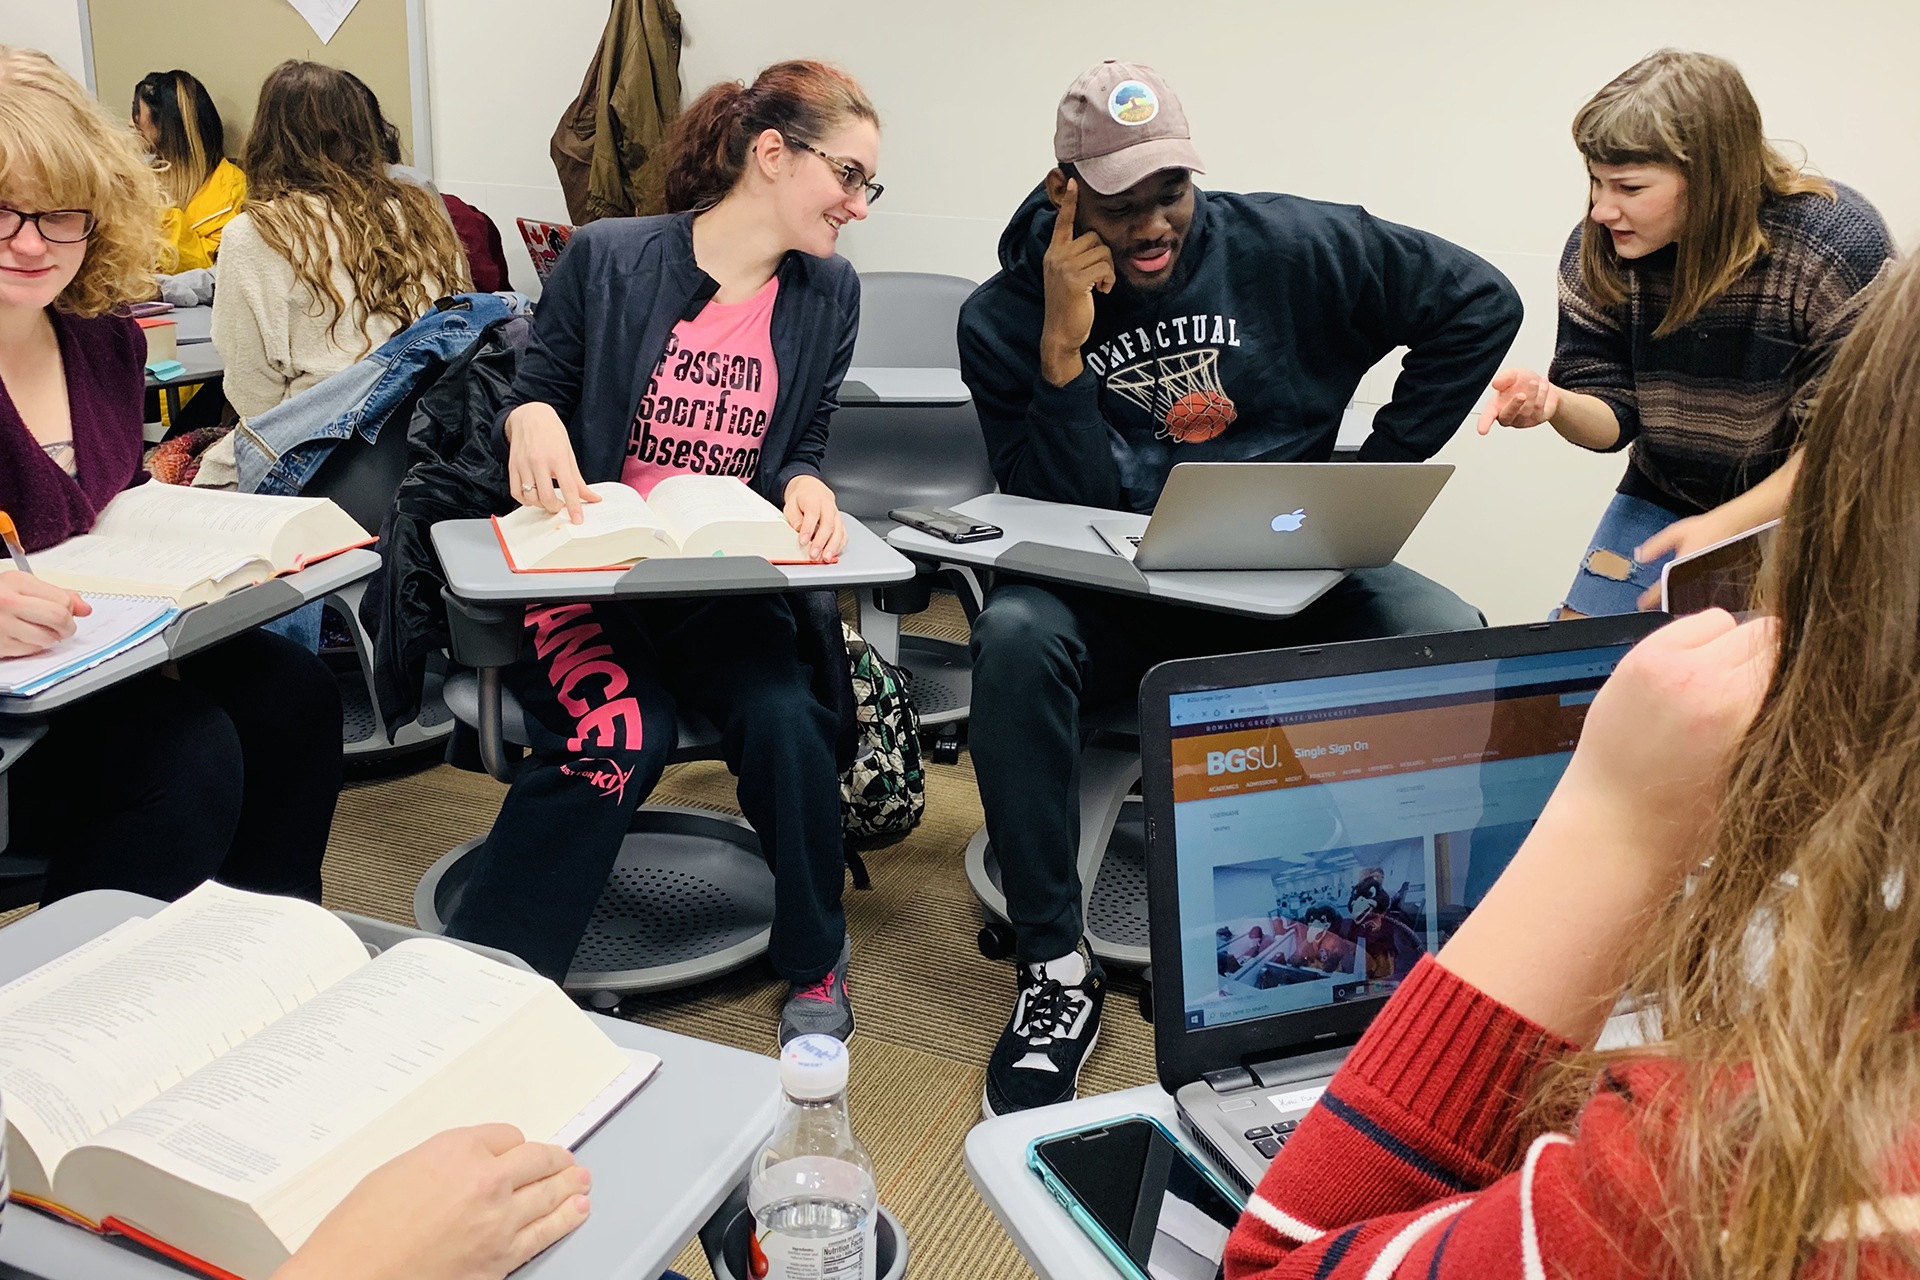 BGSU Bachelor of Arts students are skilled in forming and discussing ideas, opinions and facts.